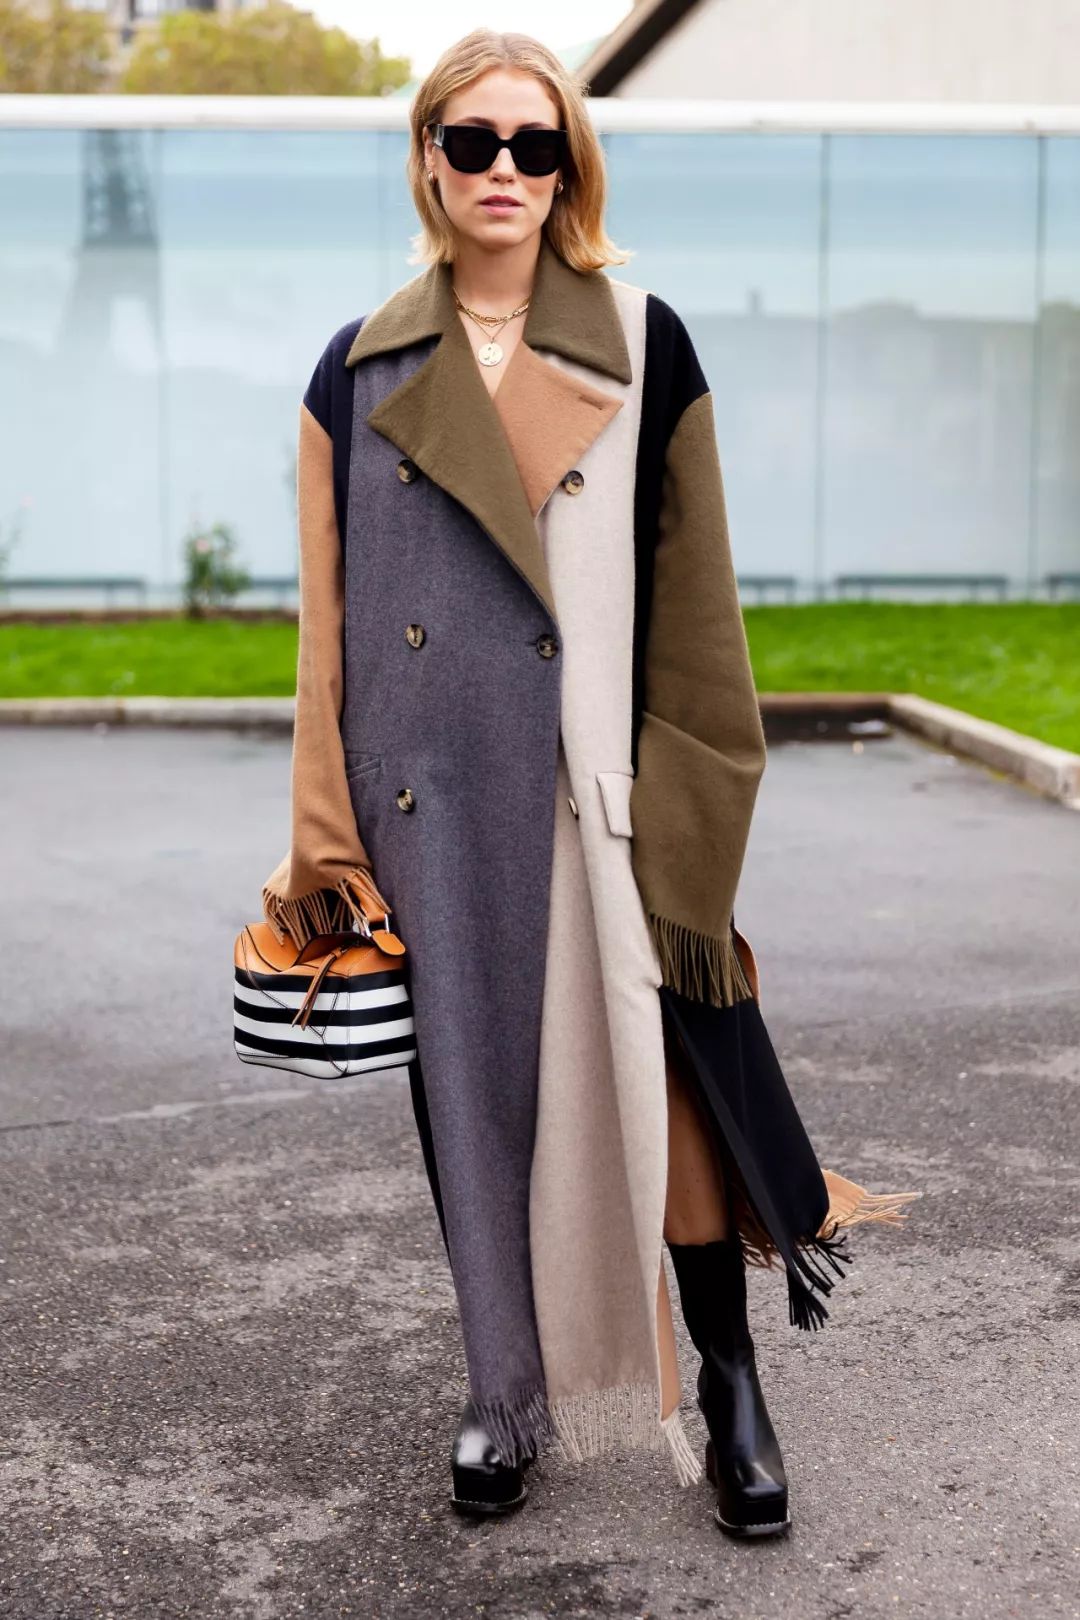 Still Wearing A Camel Coat? It's Time To Change Your Classy Coat In Spring 2020!